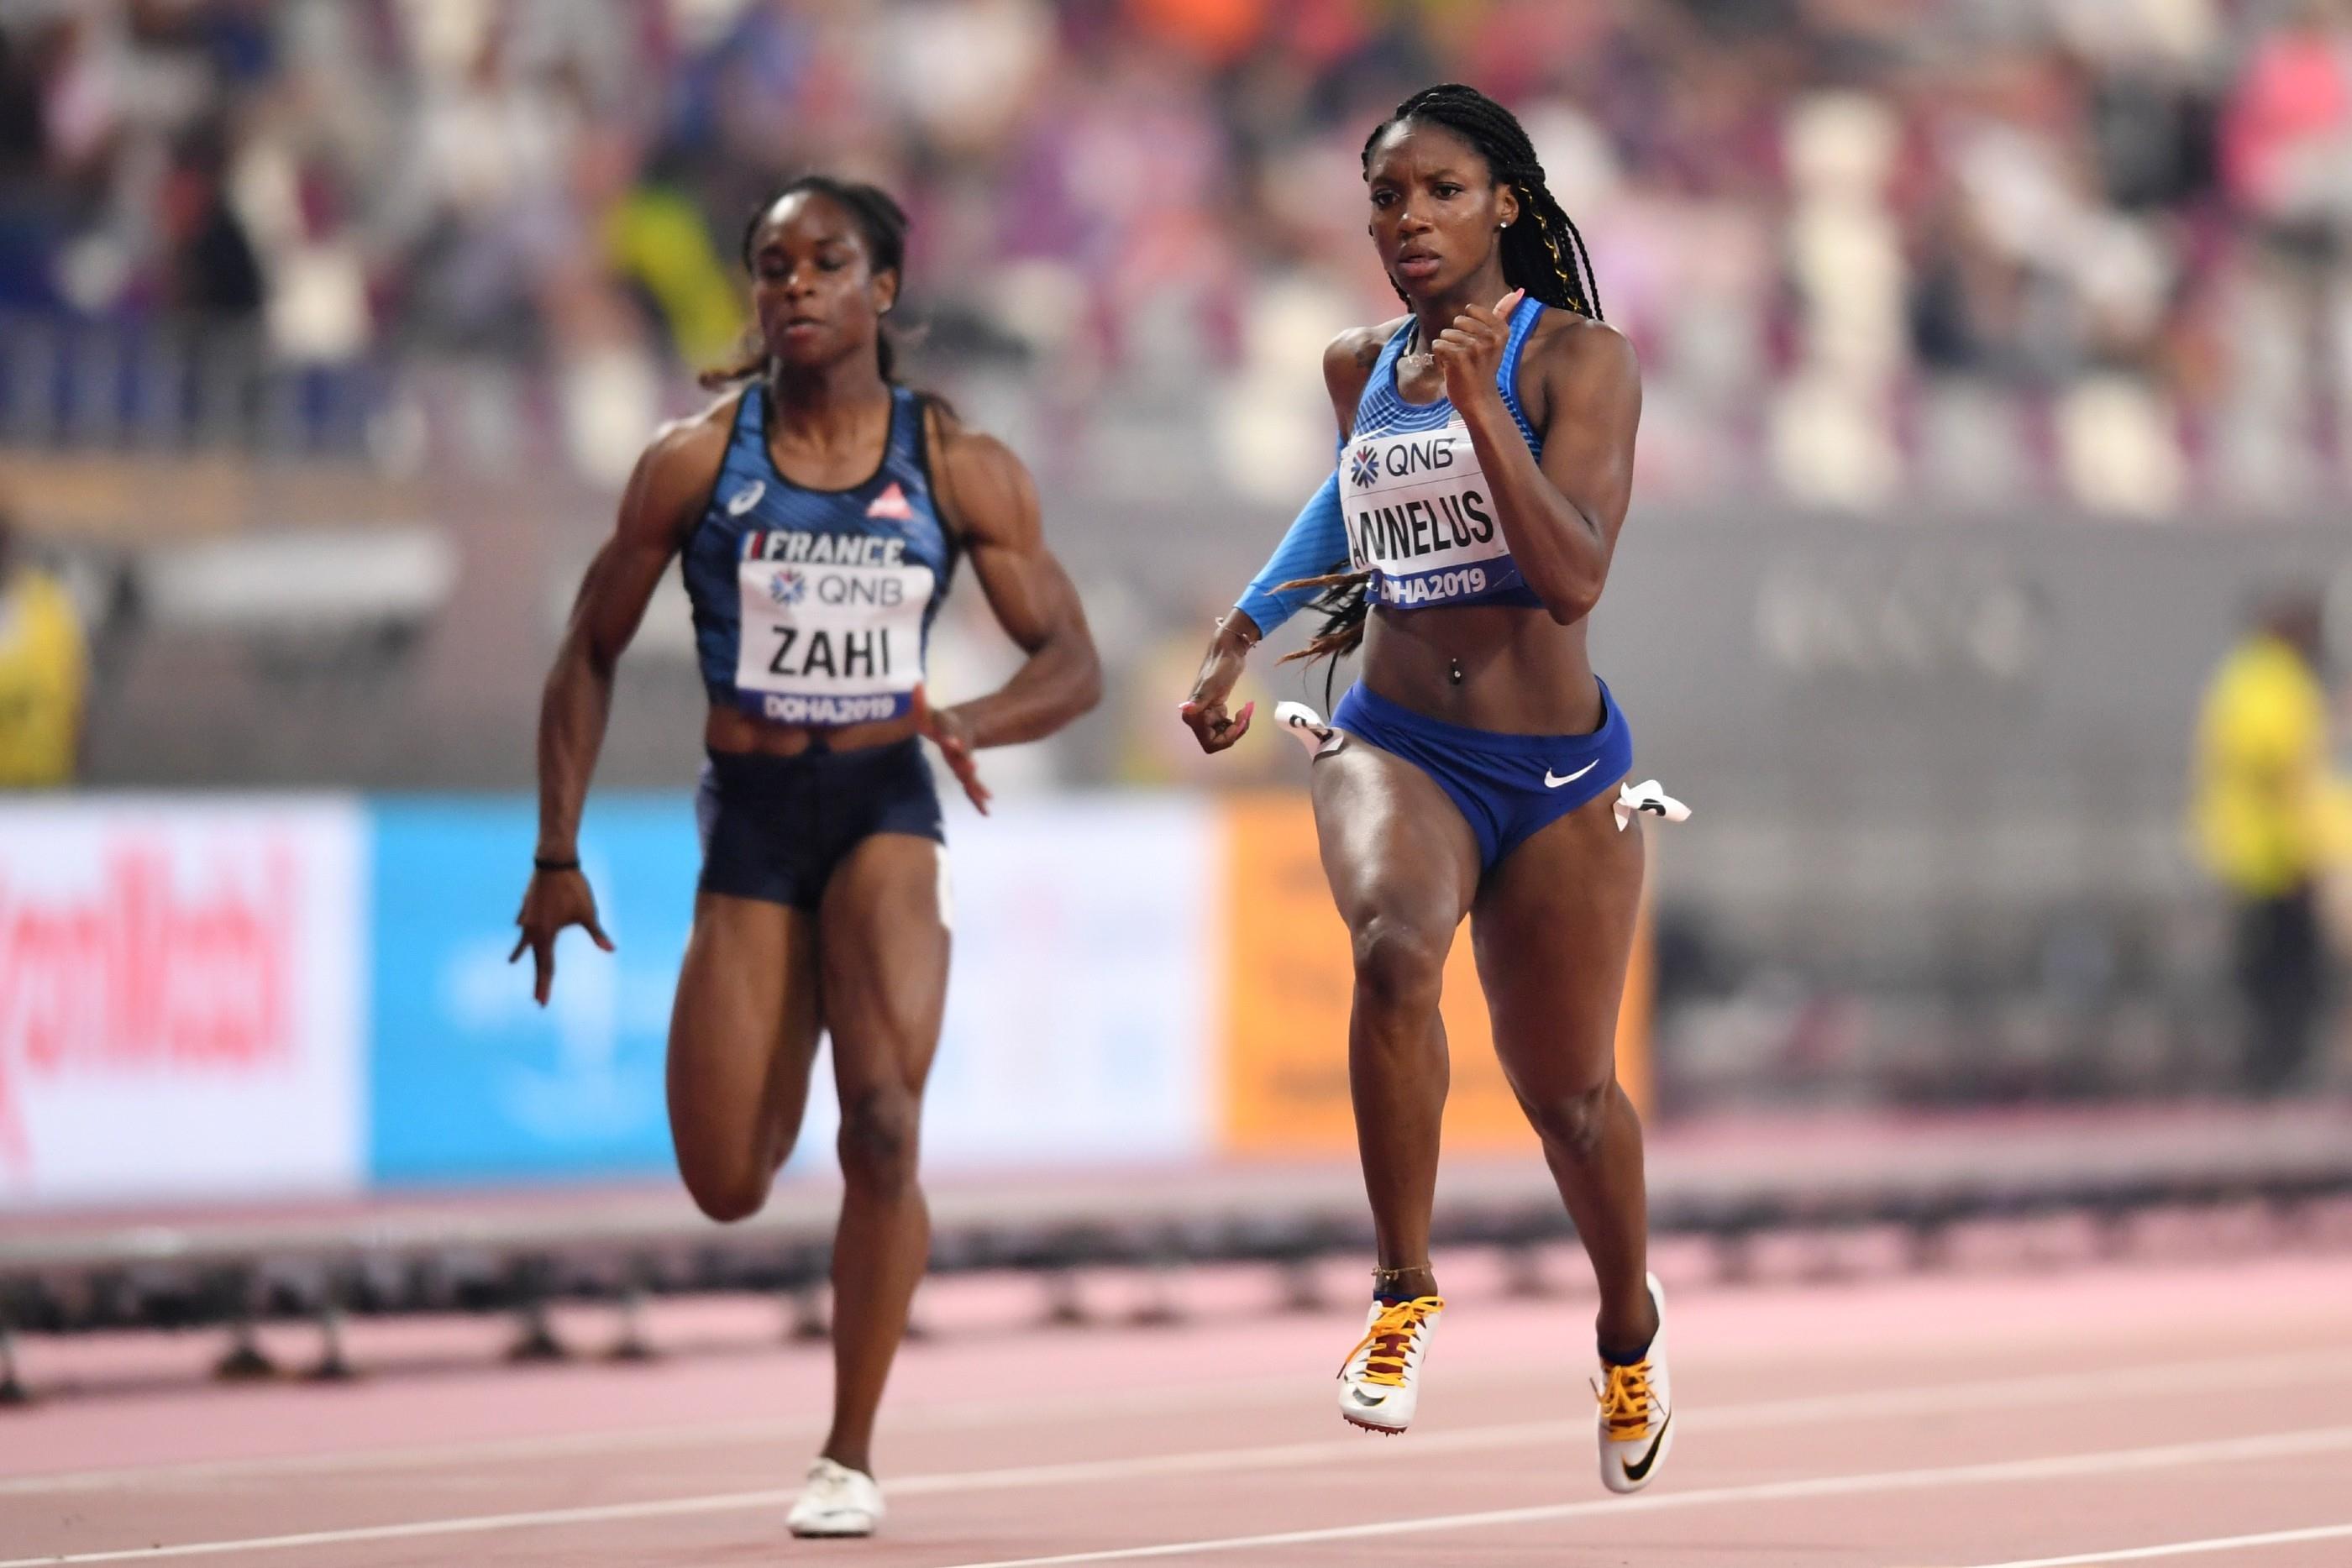 Anglerne Annelus and Carolle Zahi in the women's 200m heats at the World Championships Doha 2019 (AFP / Getty Images)